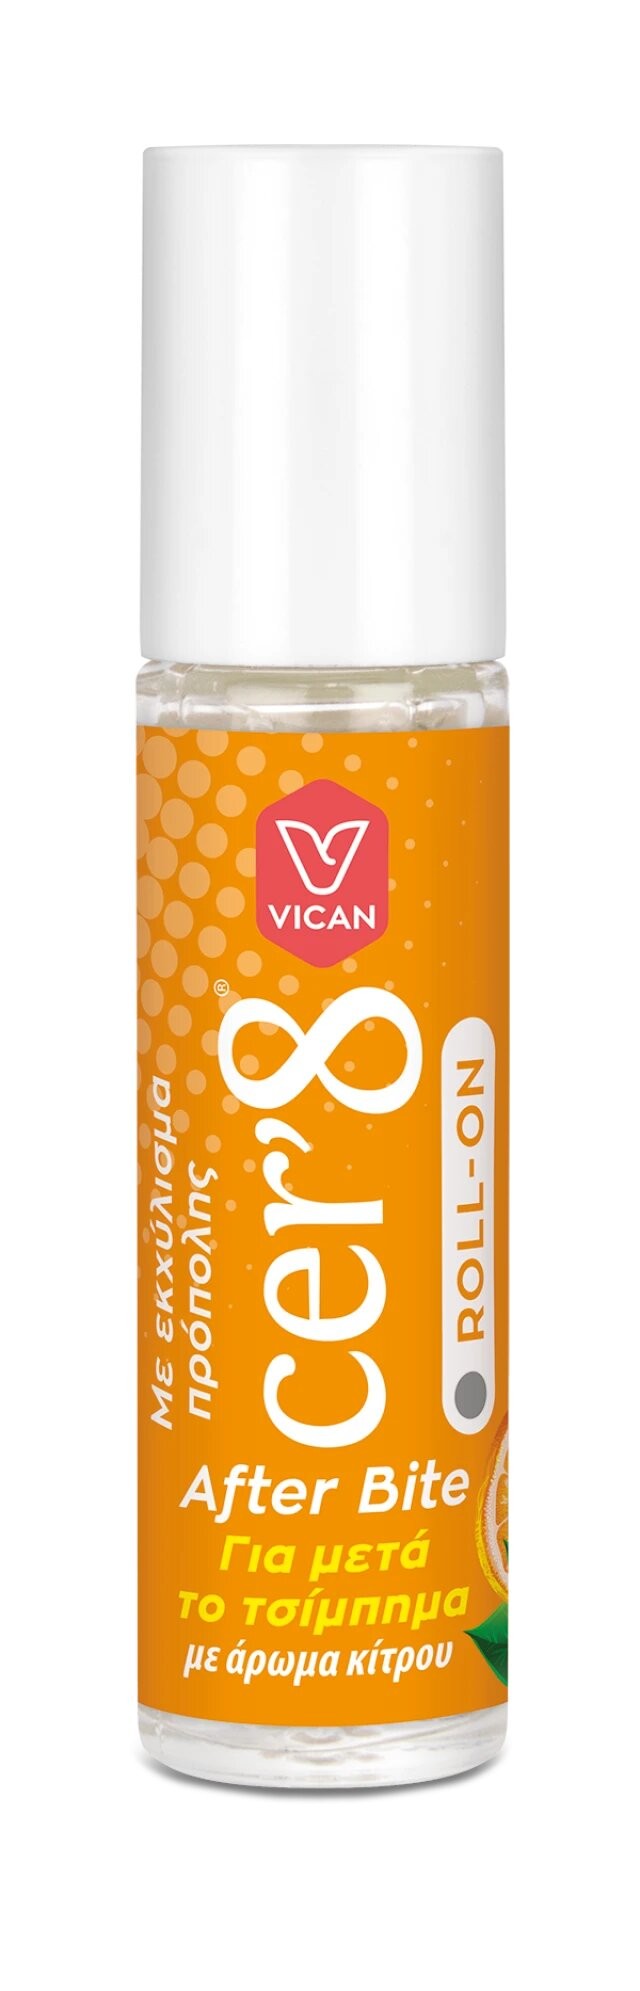 Vican Cer 8 After Bite Roll-on 10ml